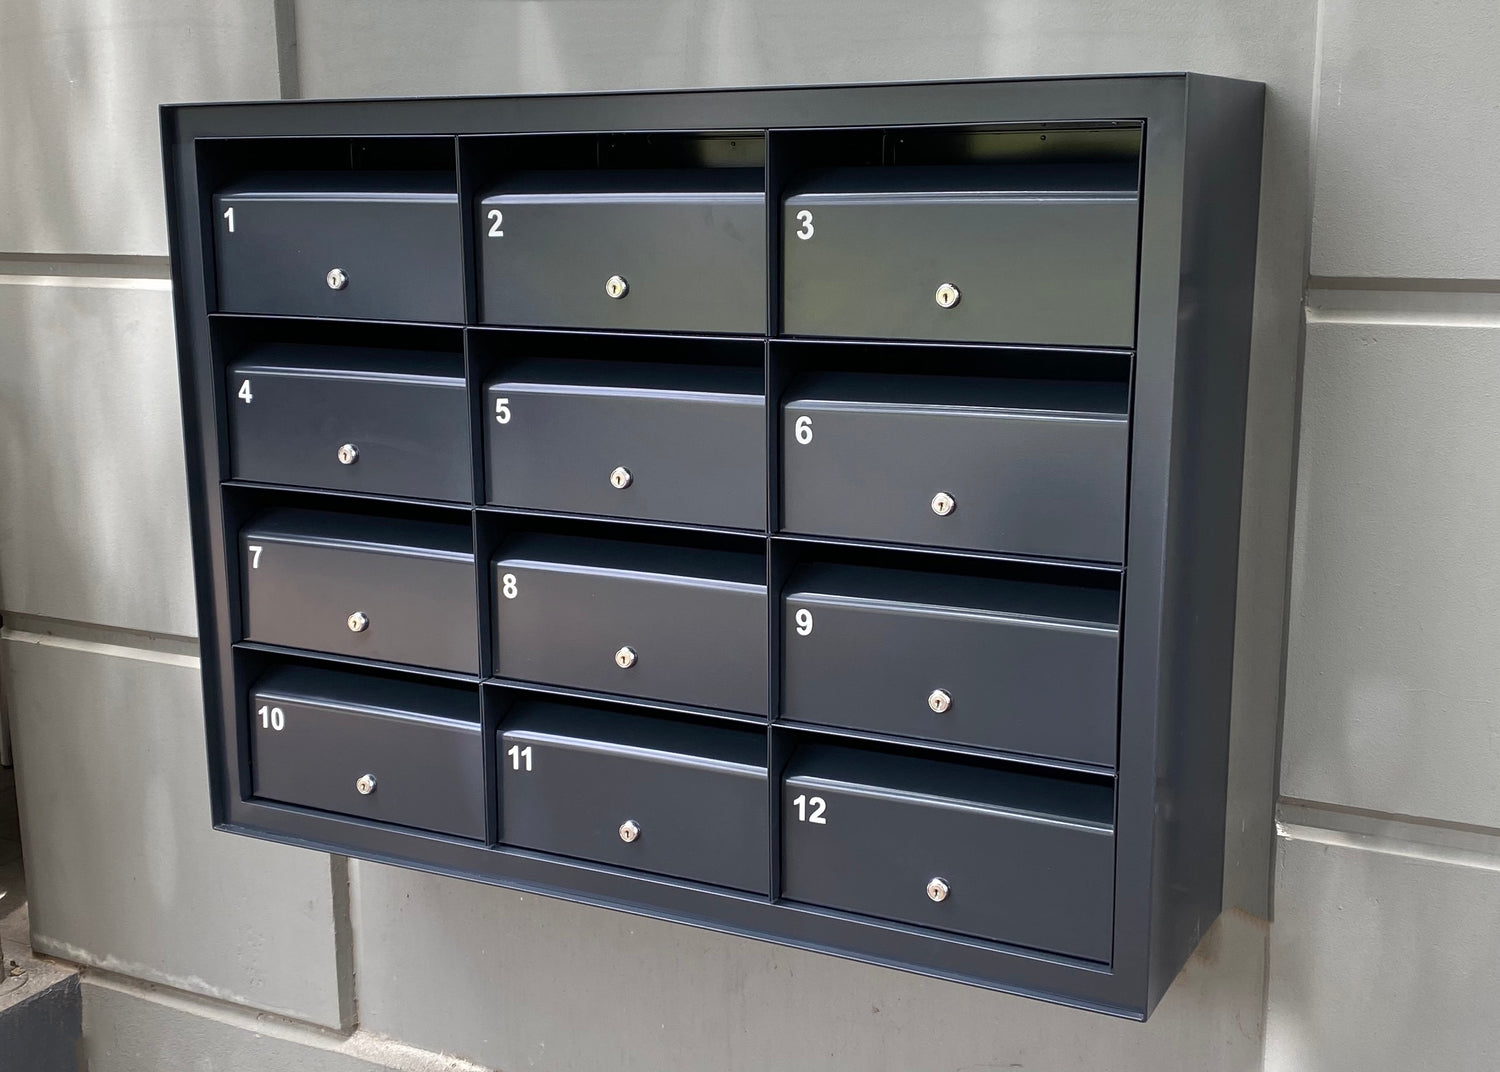 multibank letterboxes wall mounted